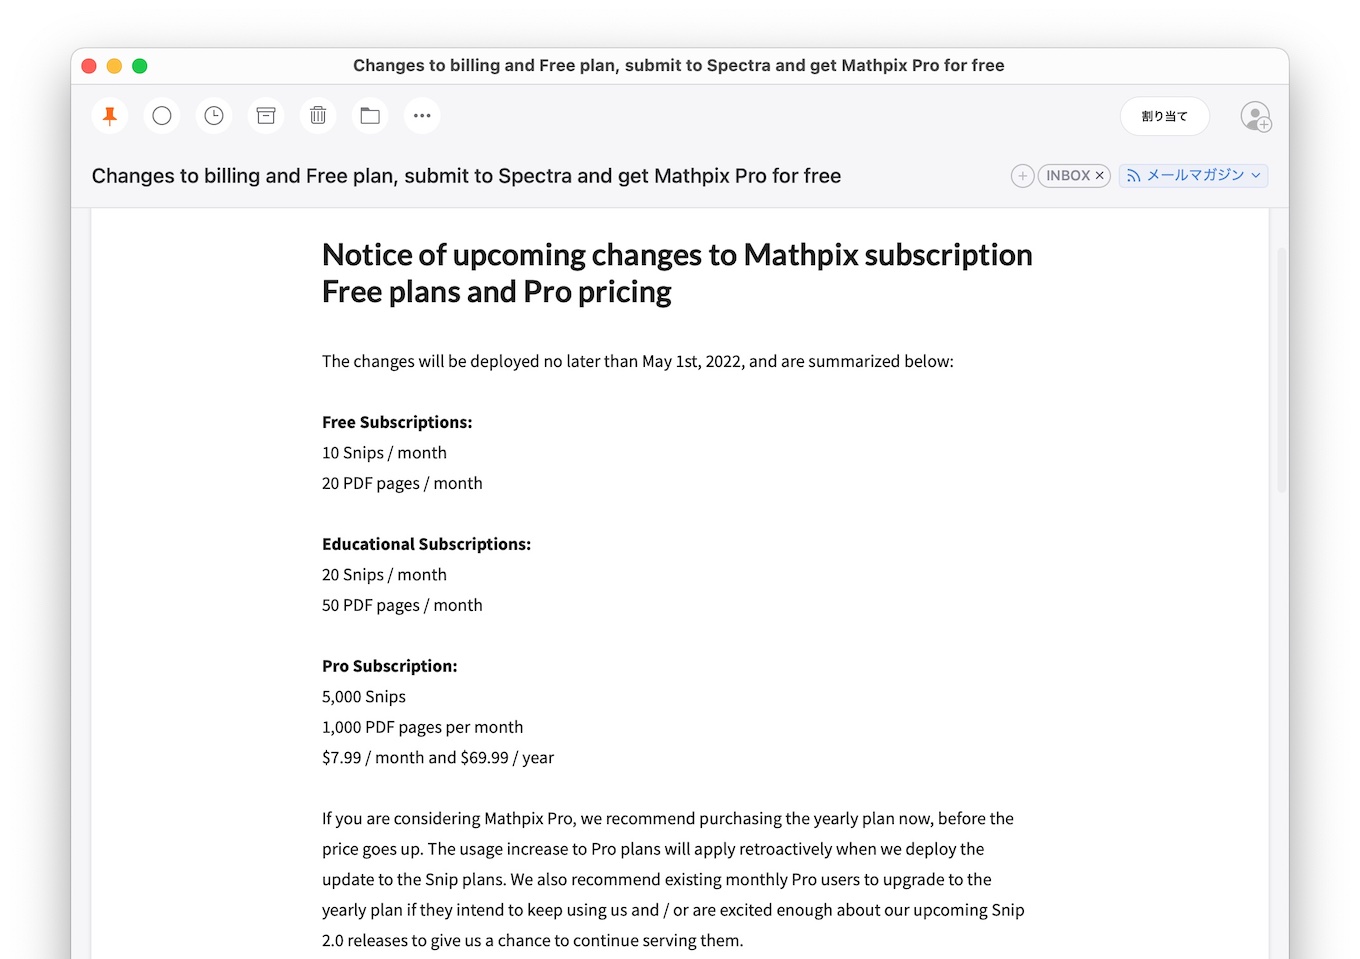 Changes to billing and Free plan, submit to Spectra and get Mathpix Pro for free